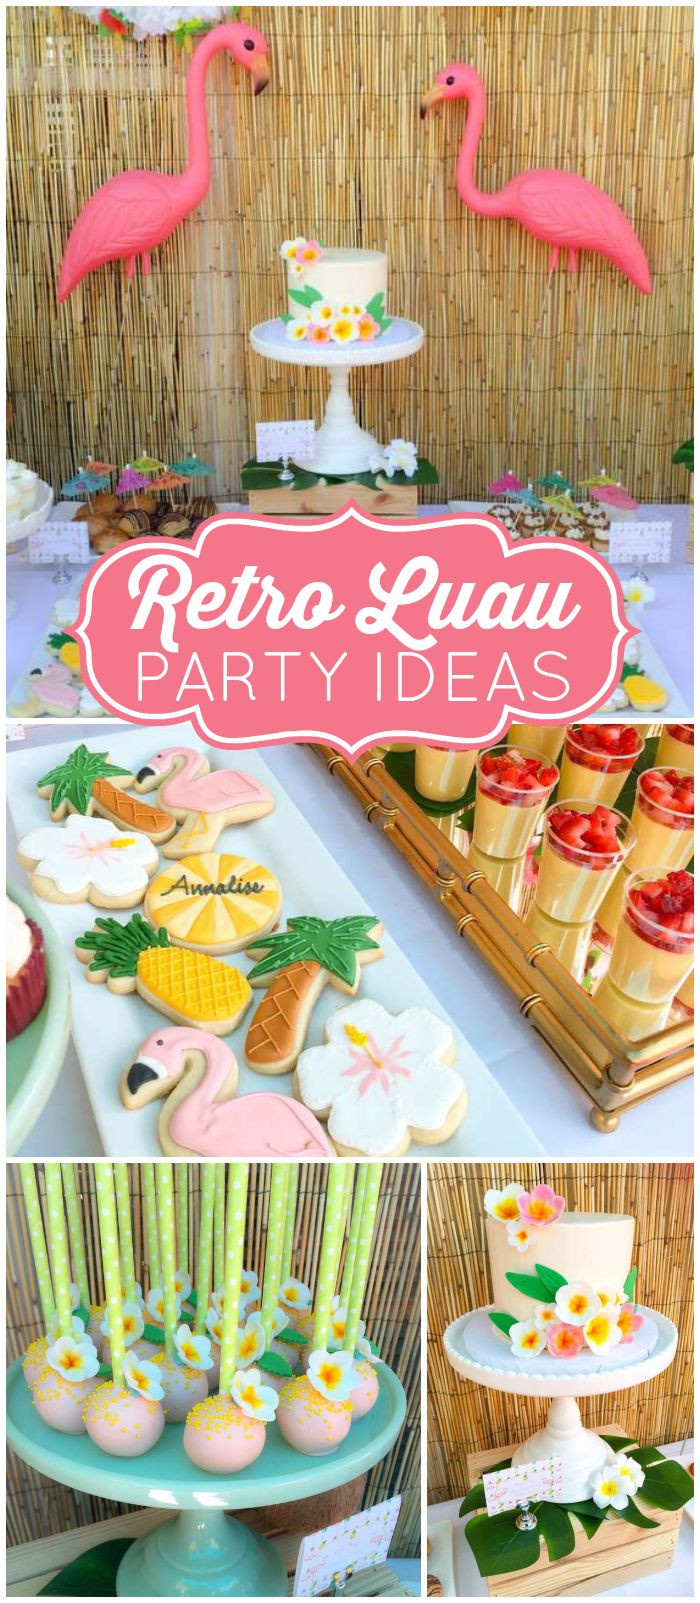 Luau Graduation Party Ideas
 How cool is this retro luau for a graduation party See